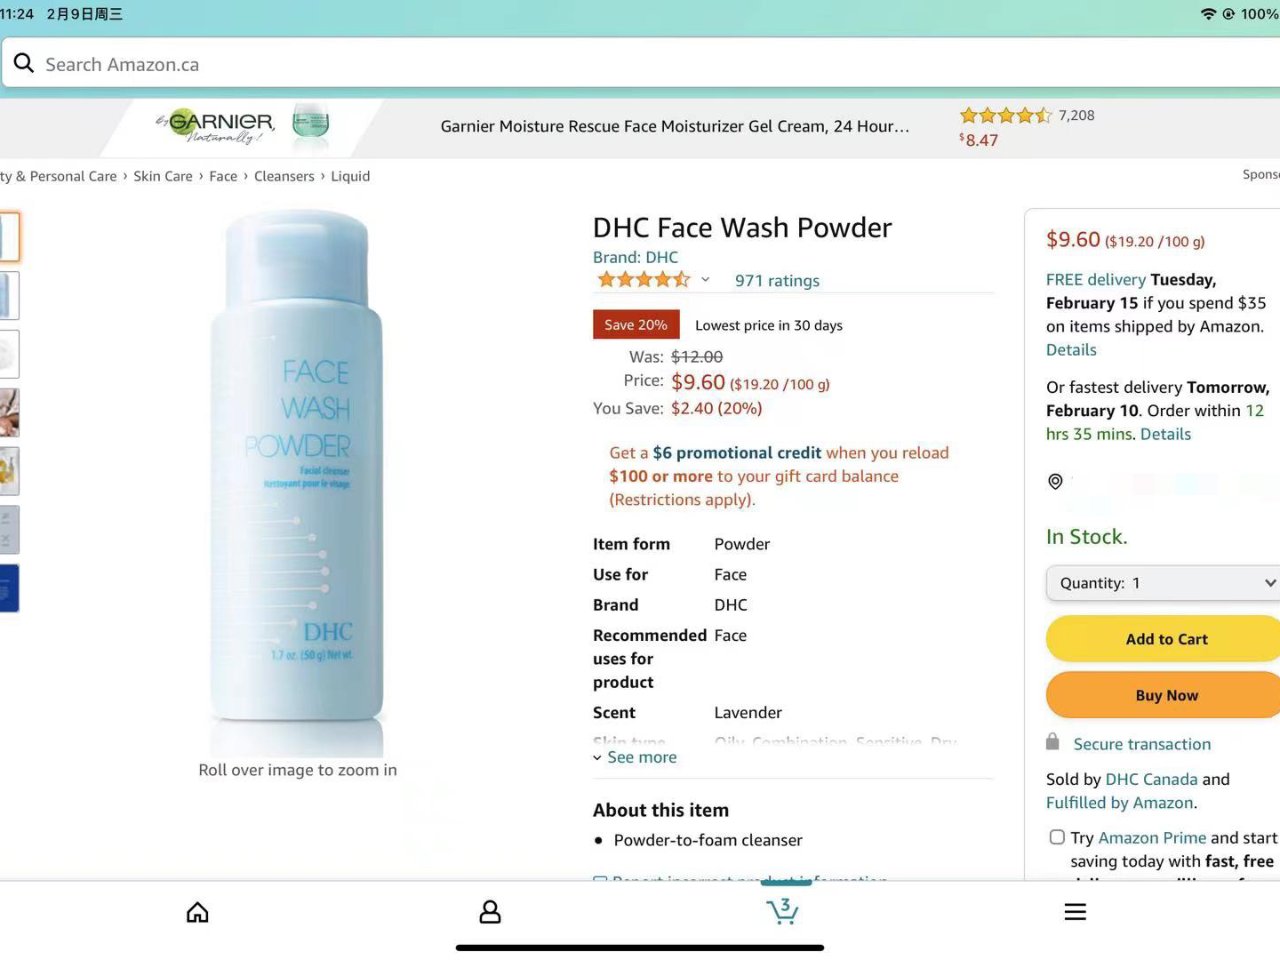 DHC Face Wash Powder : Amazon.ca: Beauty & Personal Care